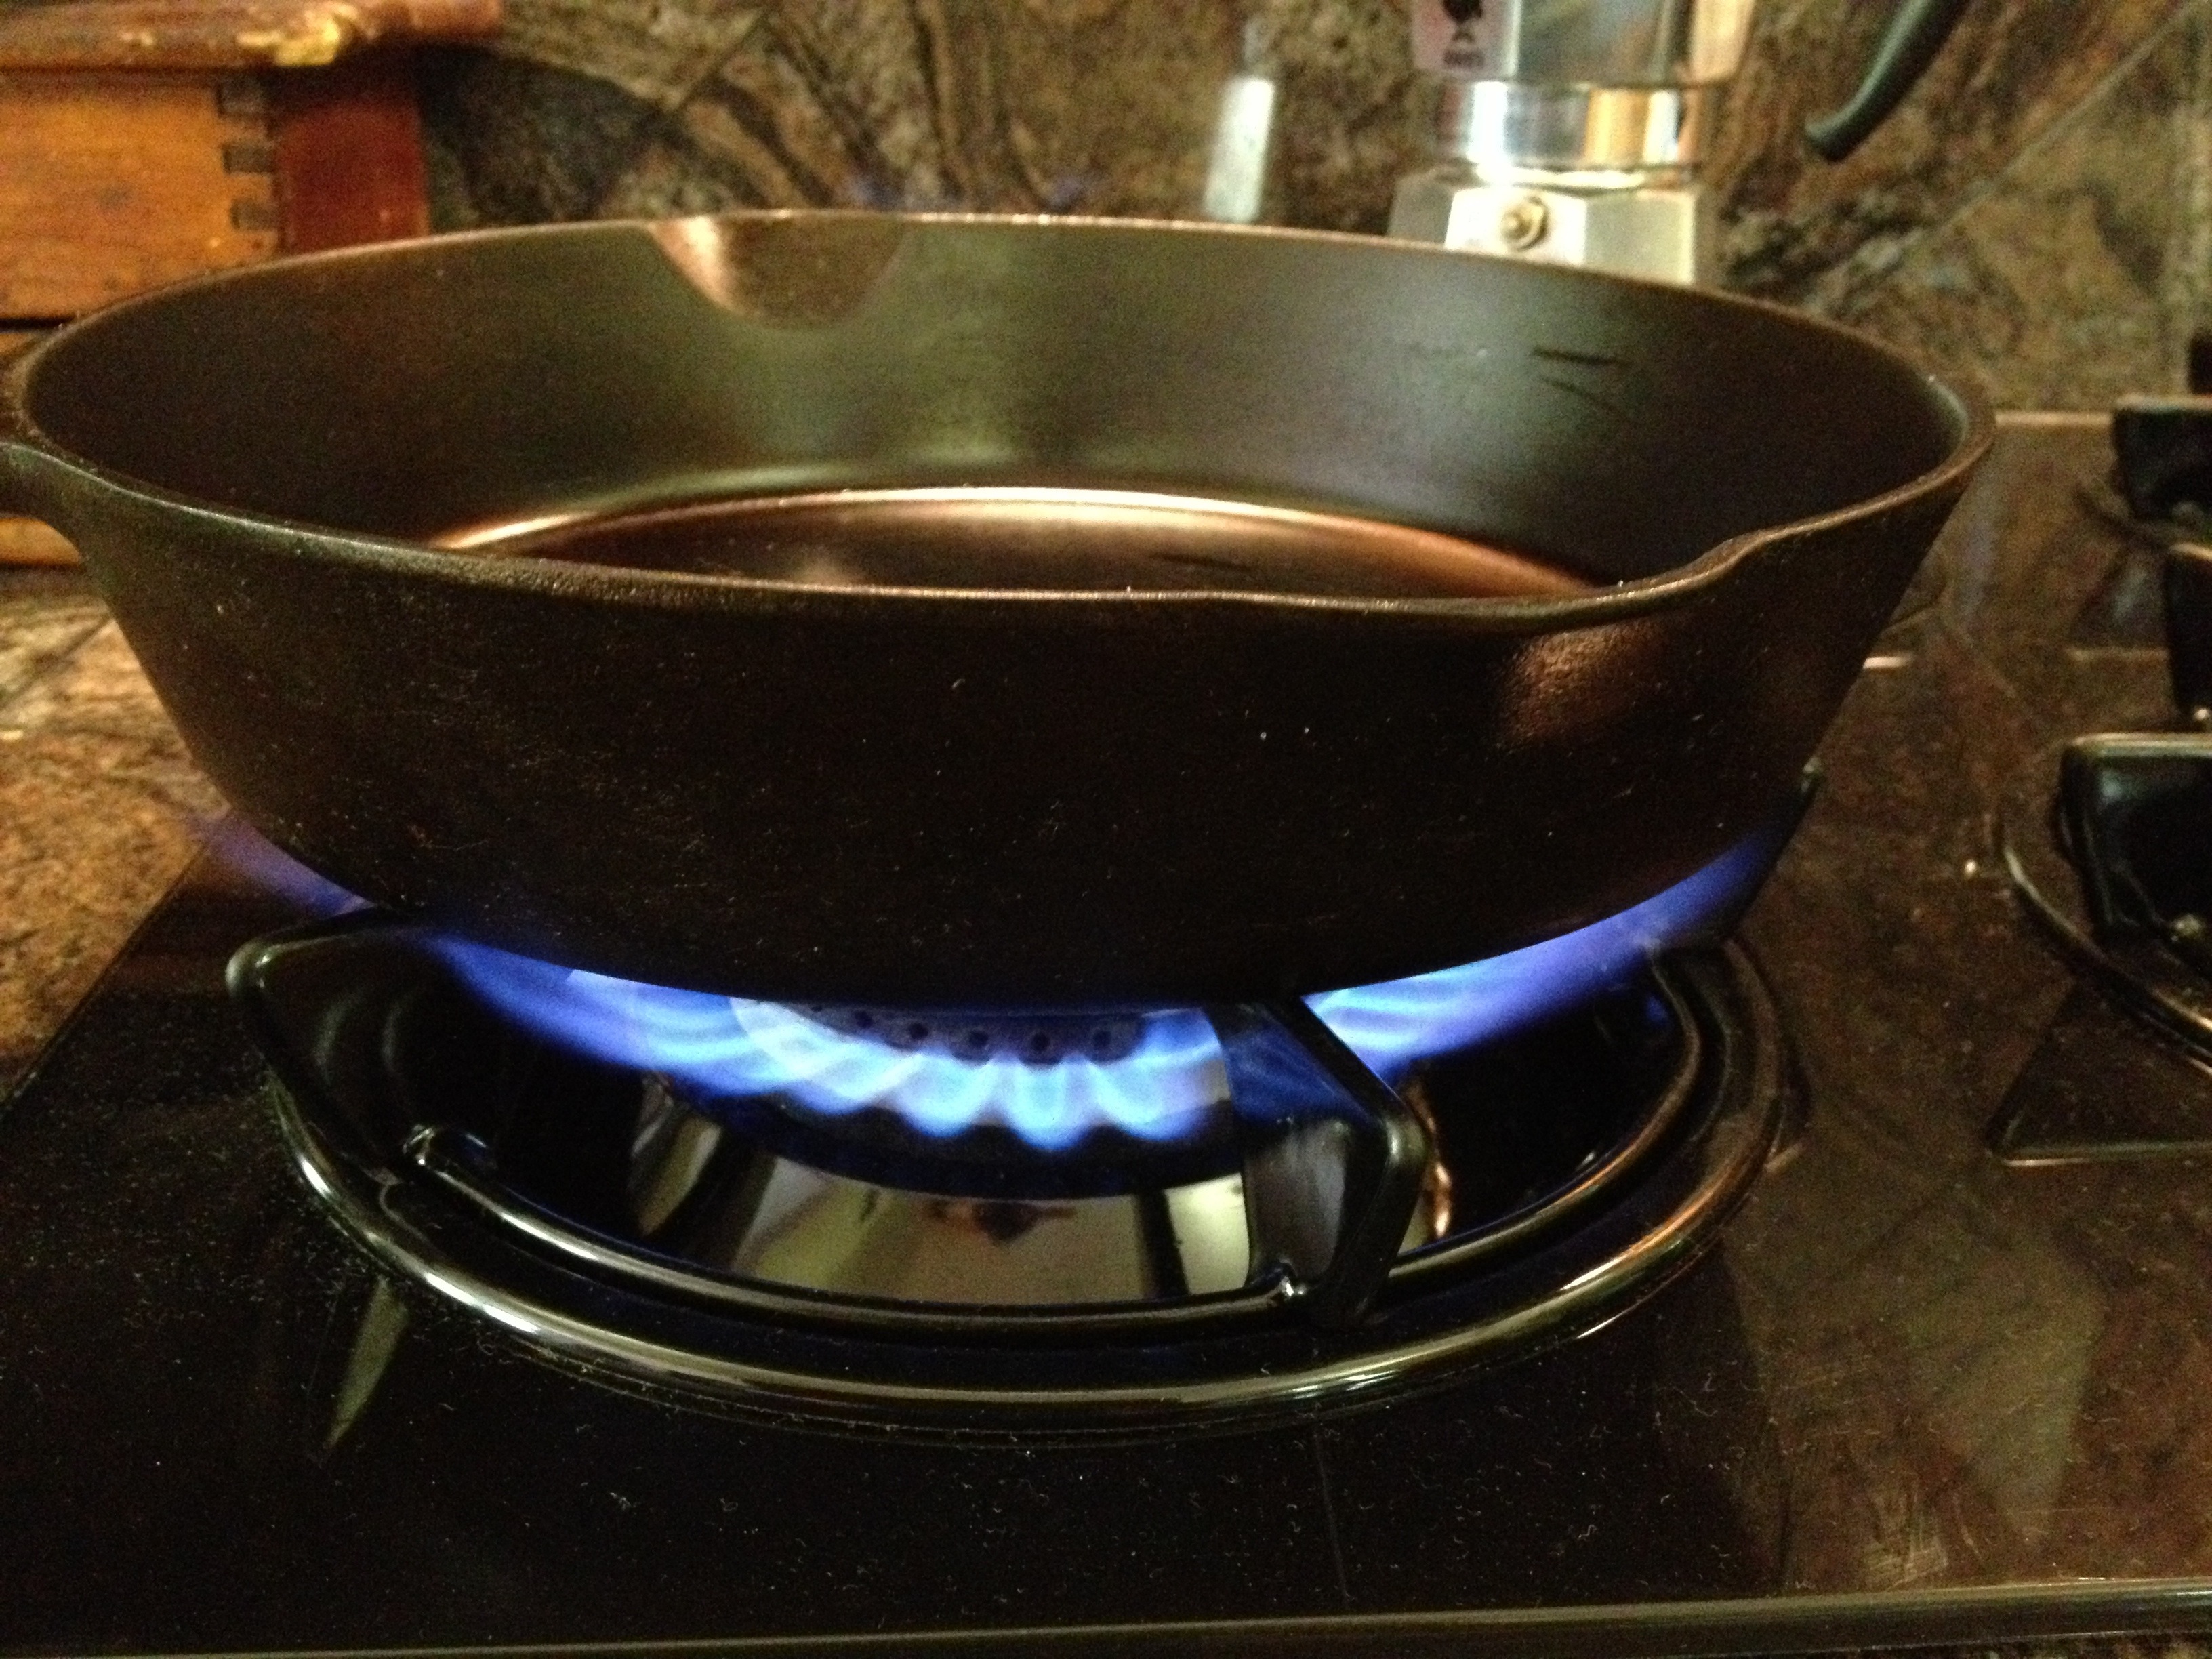 Cast iron, part 2: Cooking and cleaning